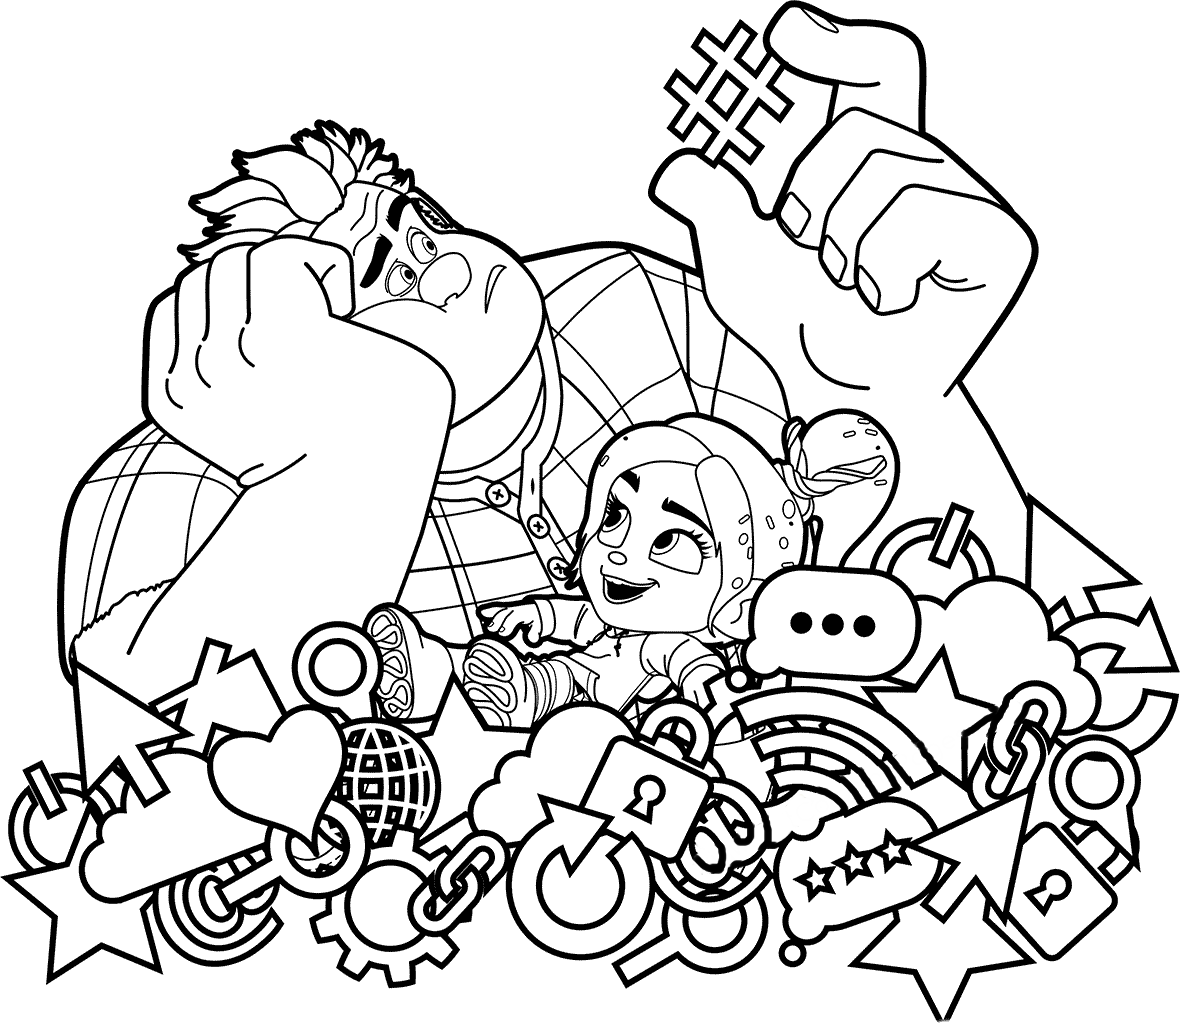 Ralph breaks the Internet - Coloring pages for you